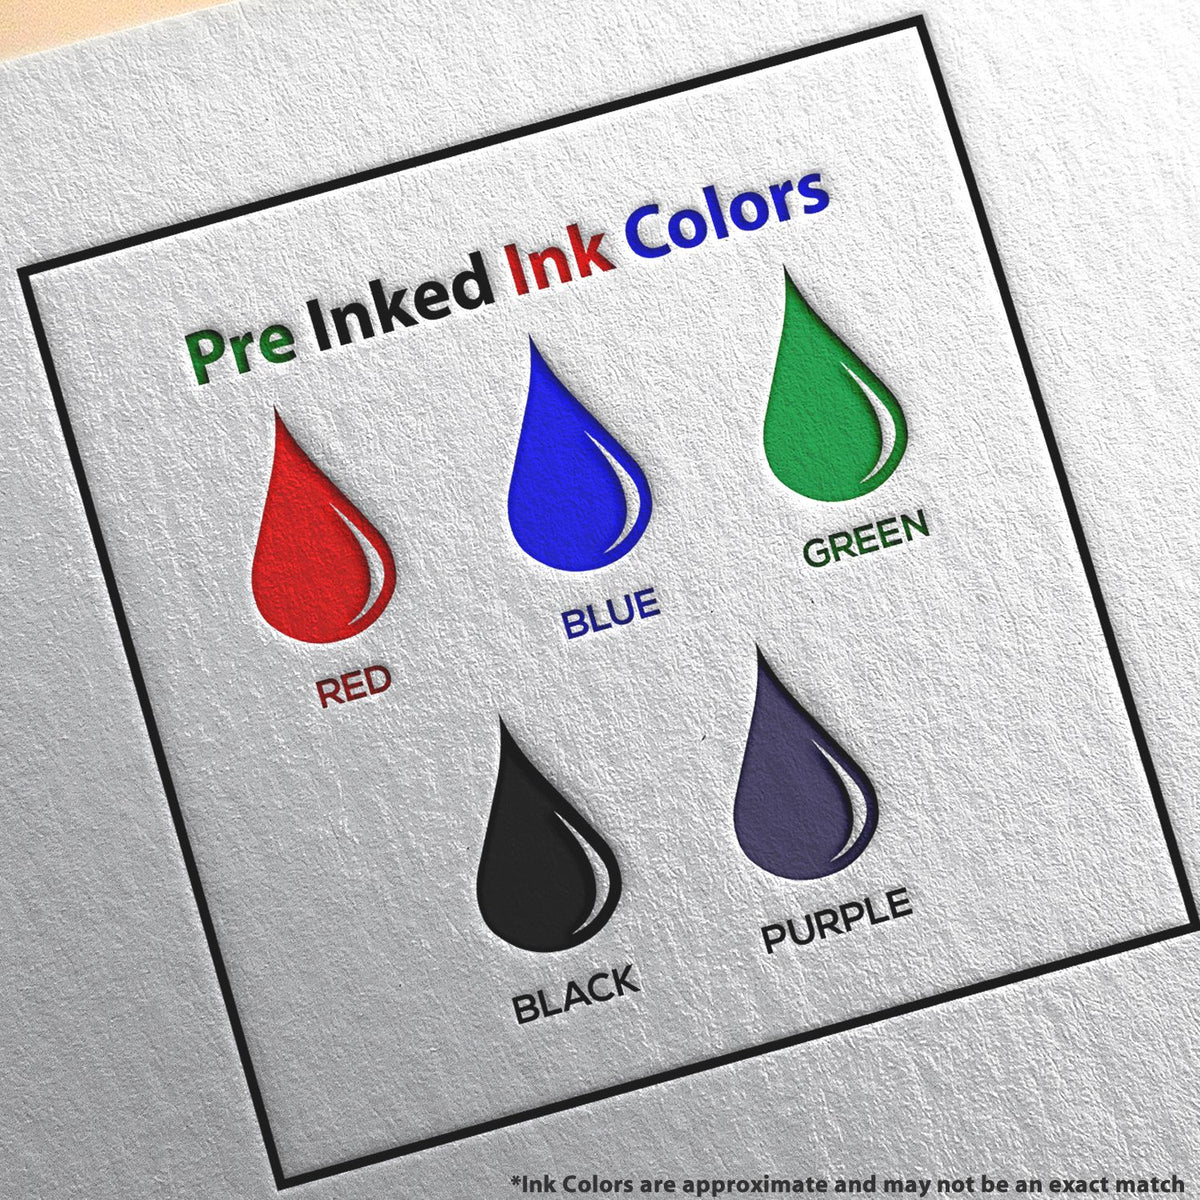 A picture showing the different ink colors or hues available for the Premium MaxLight Pre-Inked Louisiana Engineering Stamp product.